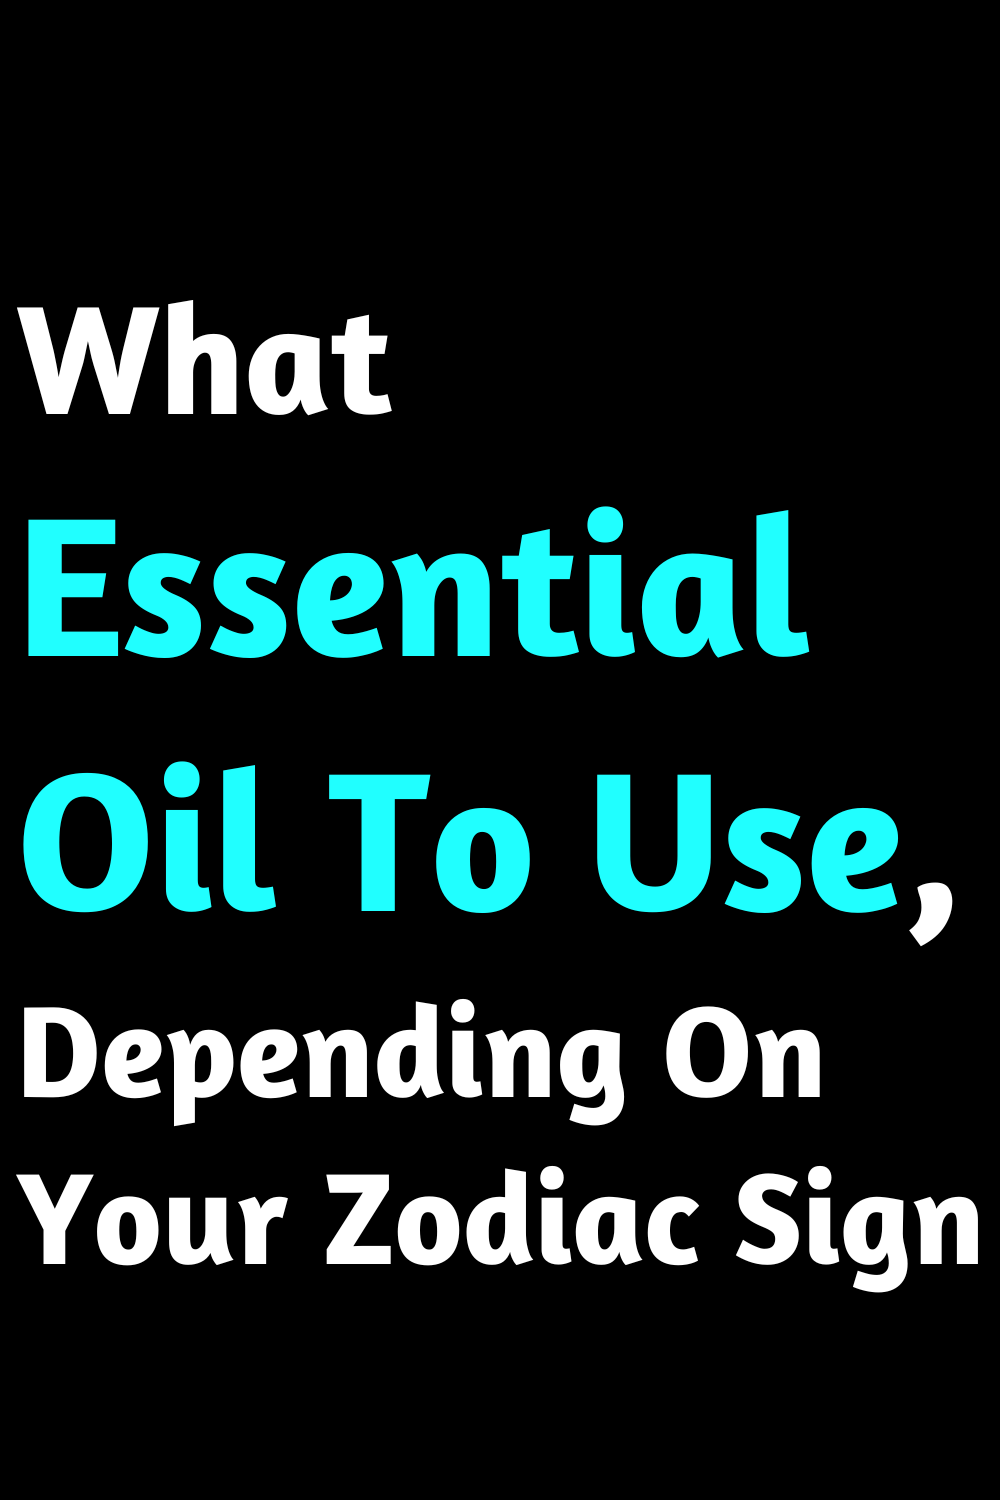 What Essential Oil To Use, Depending On Your Zodiac Sign